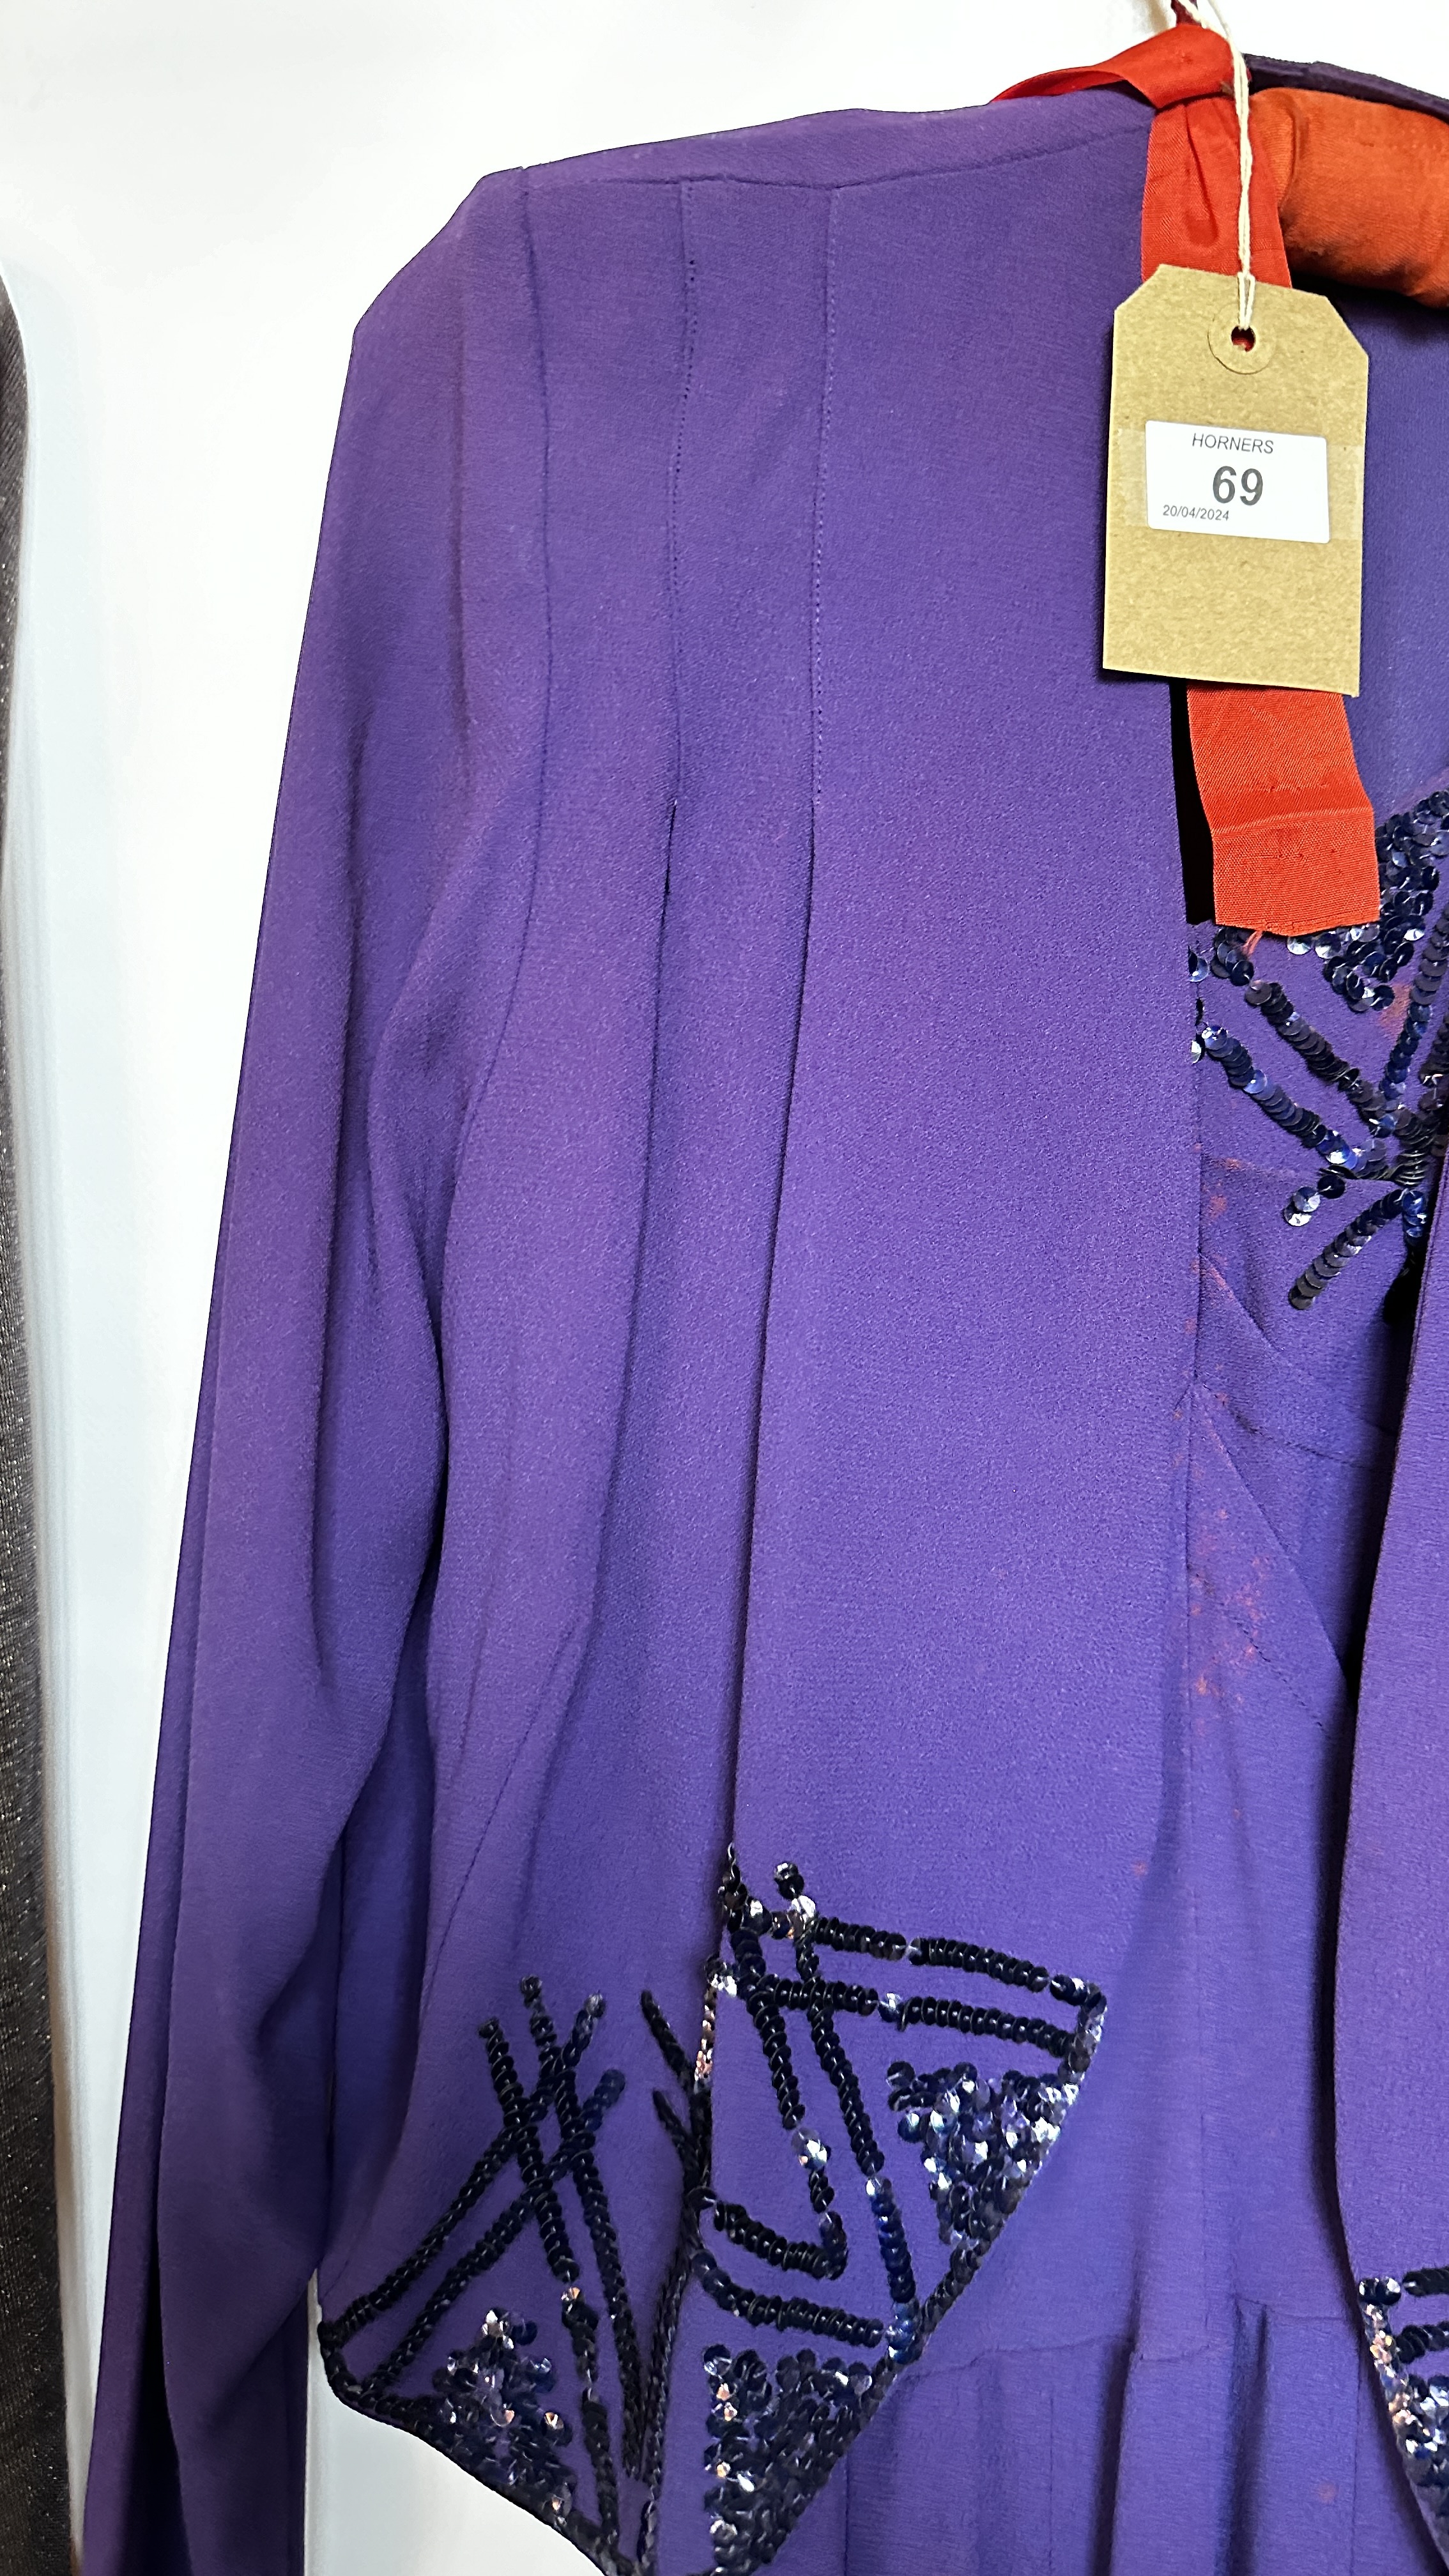 1940S PURPLE EVENING DRESS & BOLORO JACKET WITH SEQUIN DECORATION ON BODICE AND JACKET AND A 1940S - Image 14 of 37